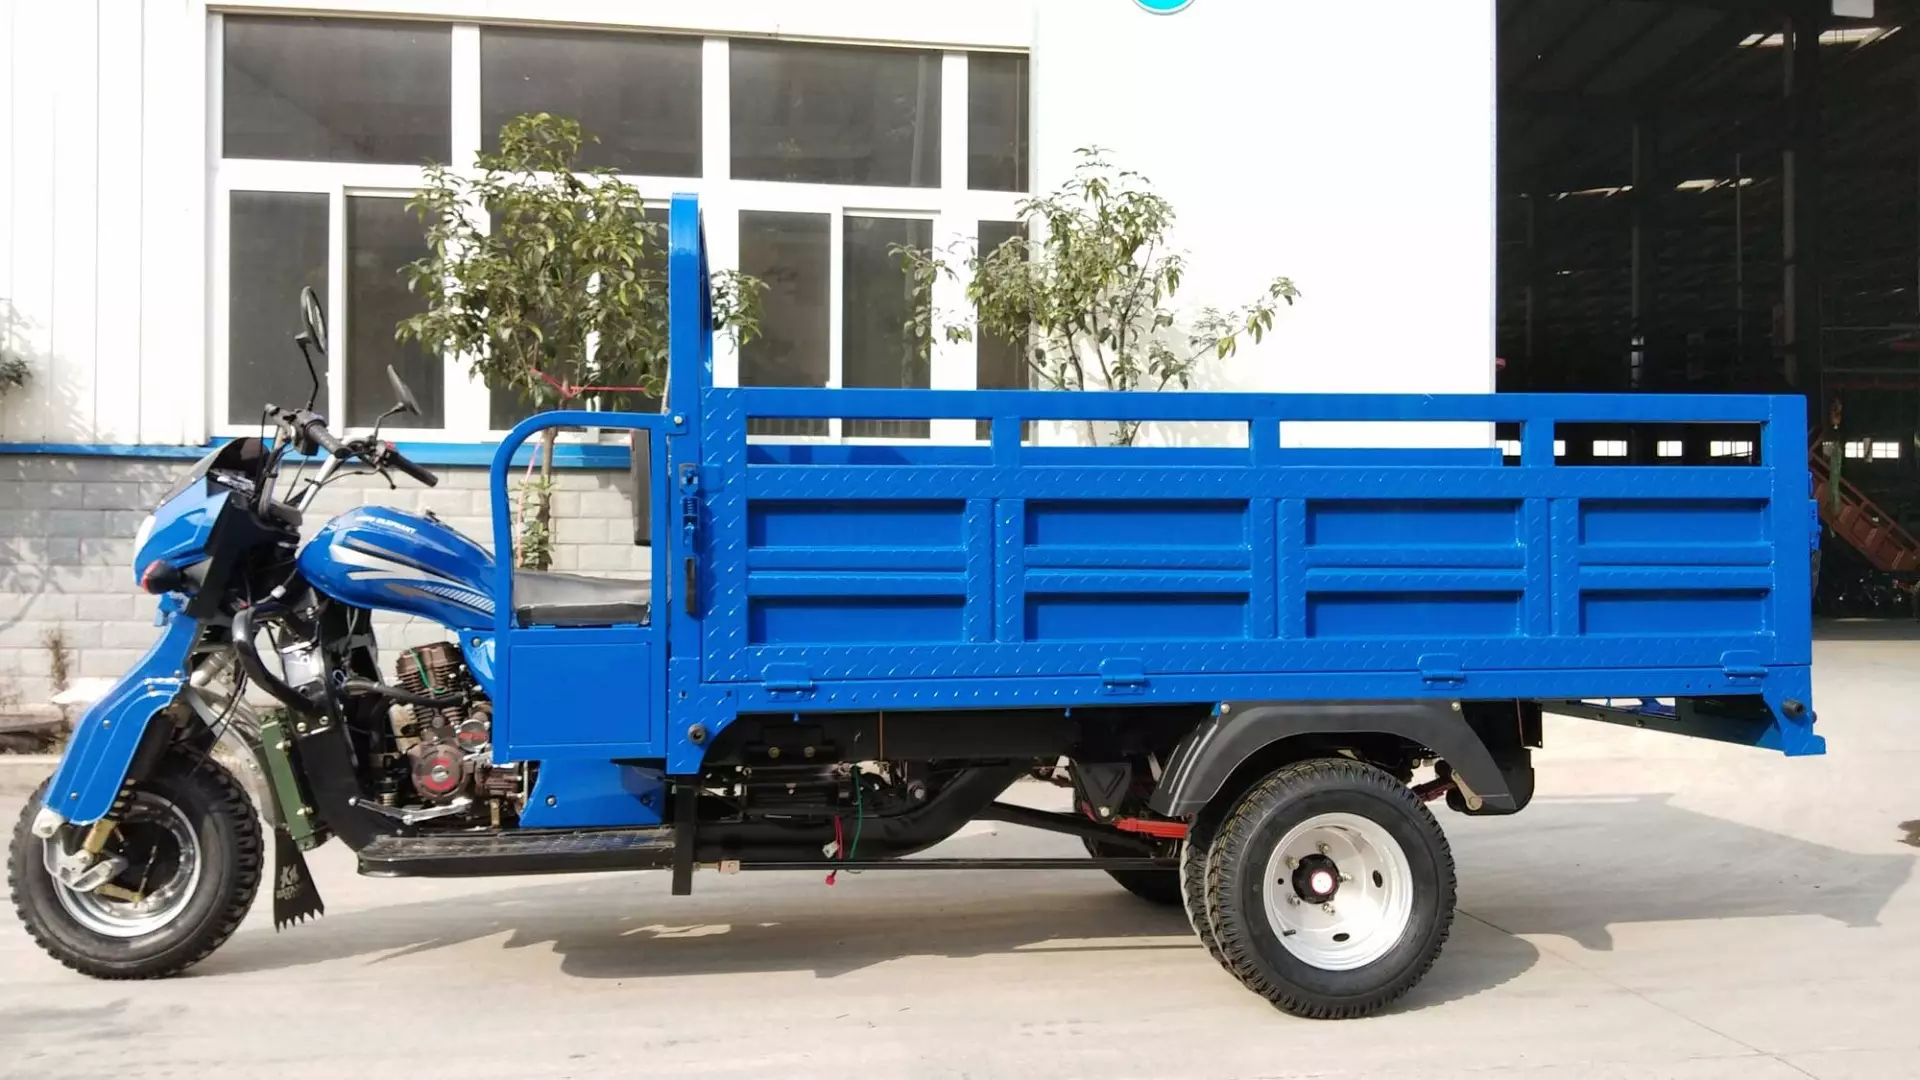 Heavy loading truck transport tricycle frame with motor price motorized tricycles China Max blue body power engine cool